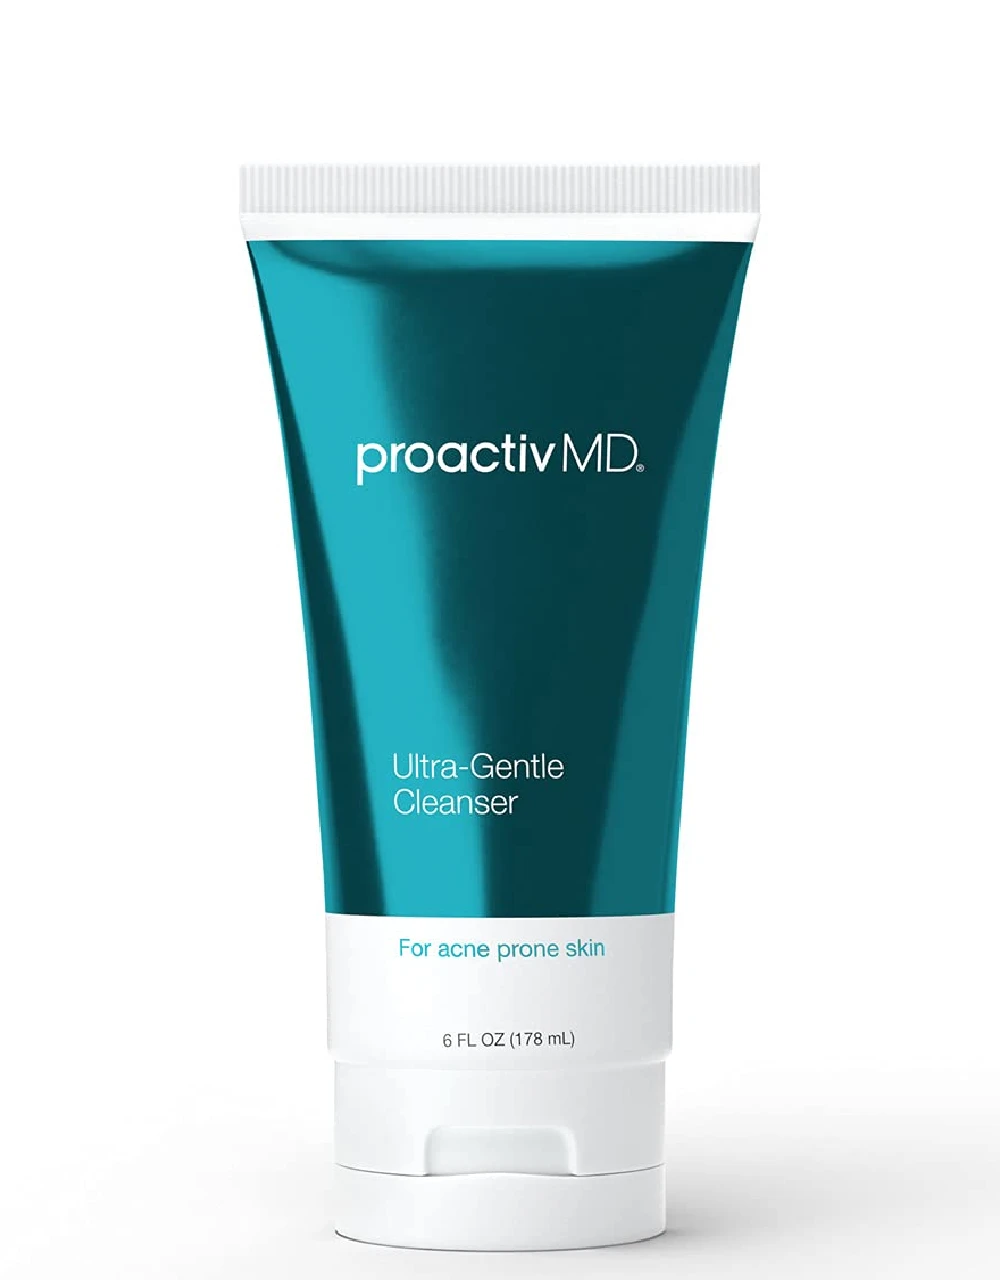 ProactivMD Ultra Gentle Face Cleanser is a facial wash